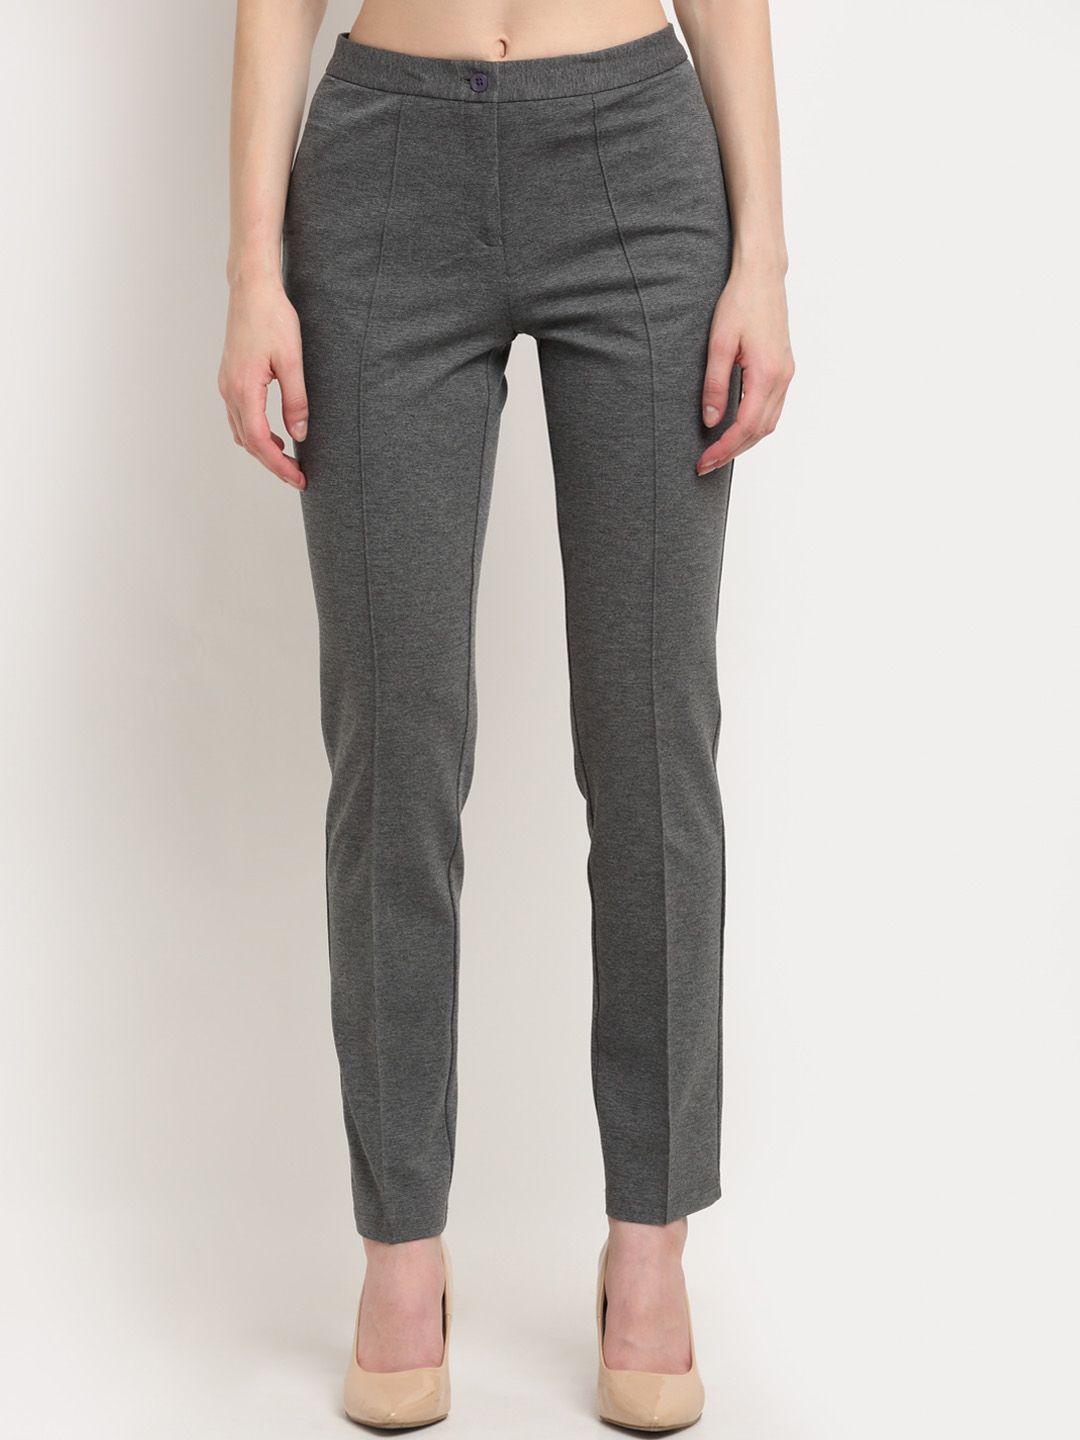 crozo-by-cantabil-women-grey-slim-fit-pleated-formal-trousers